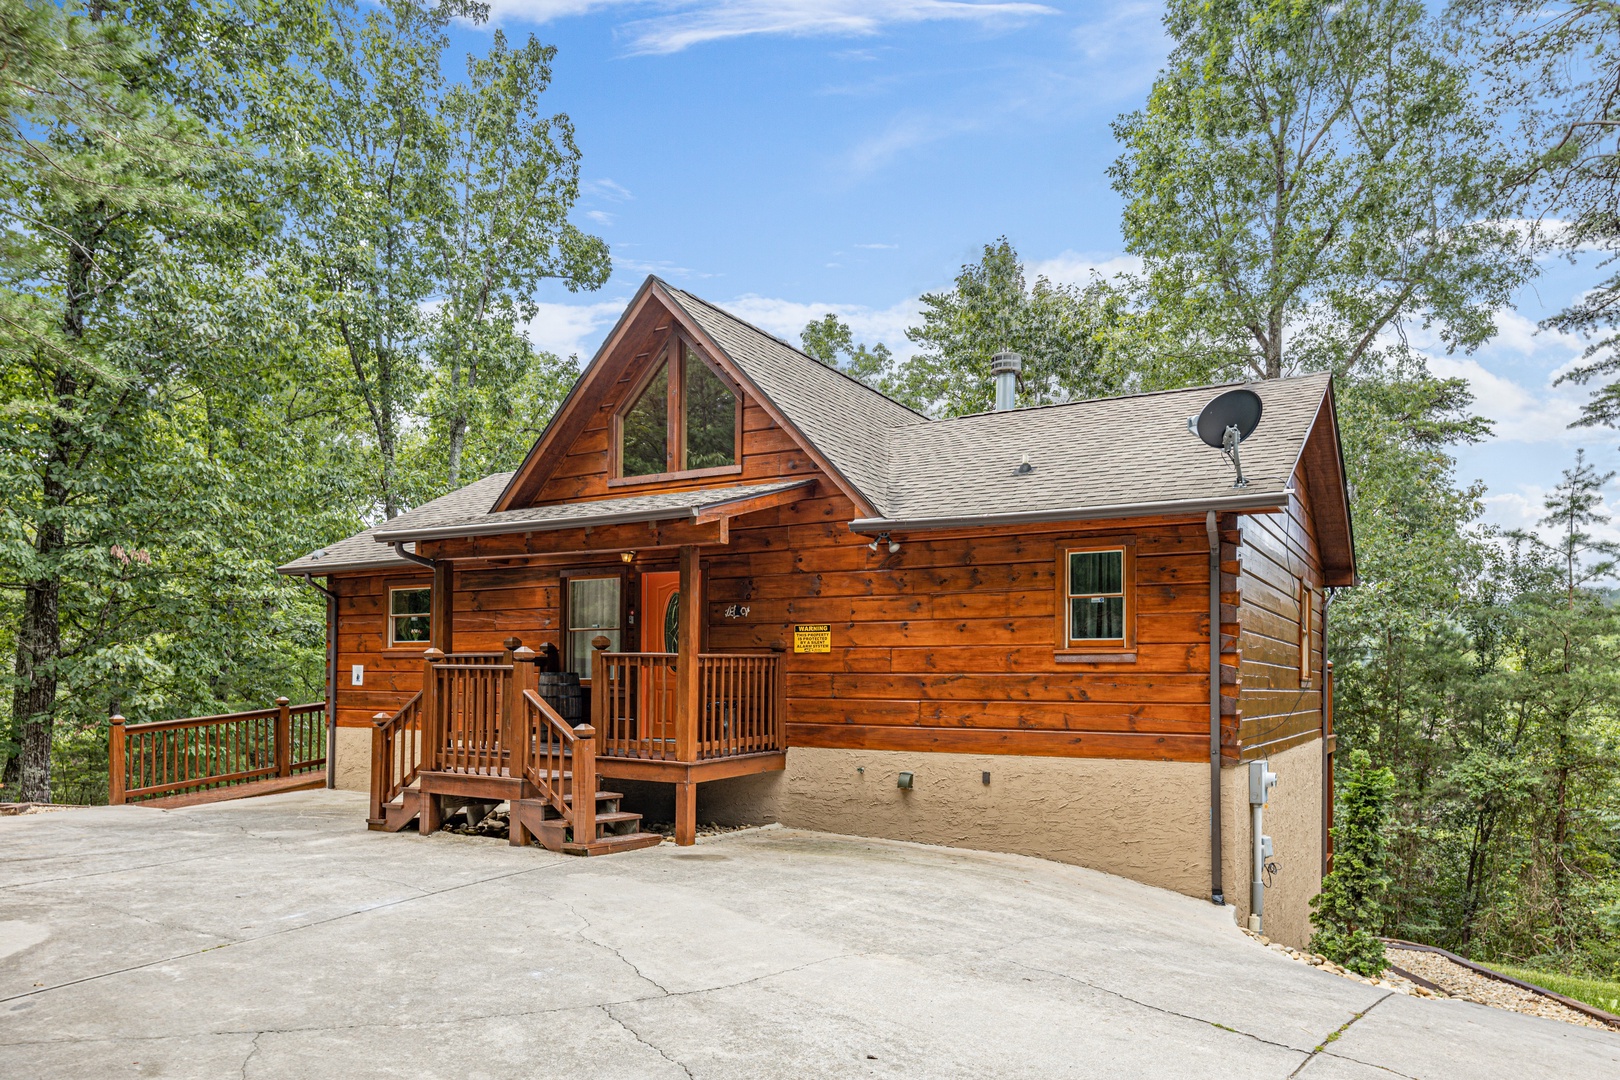 Wildlife Retreat, a 3 bedroom cabin rental located in Pigeon Forge